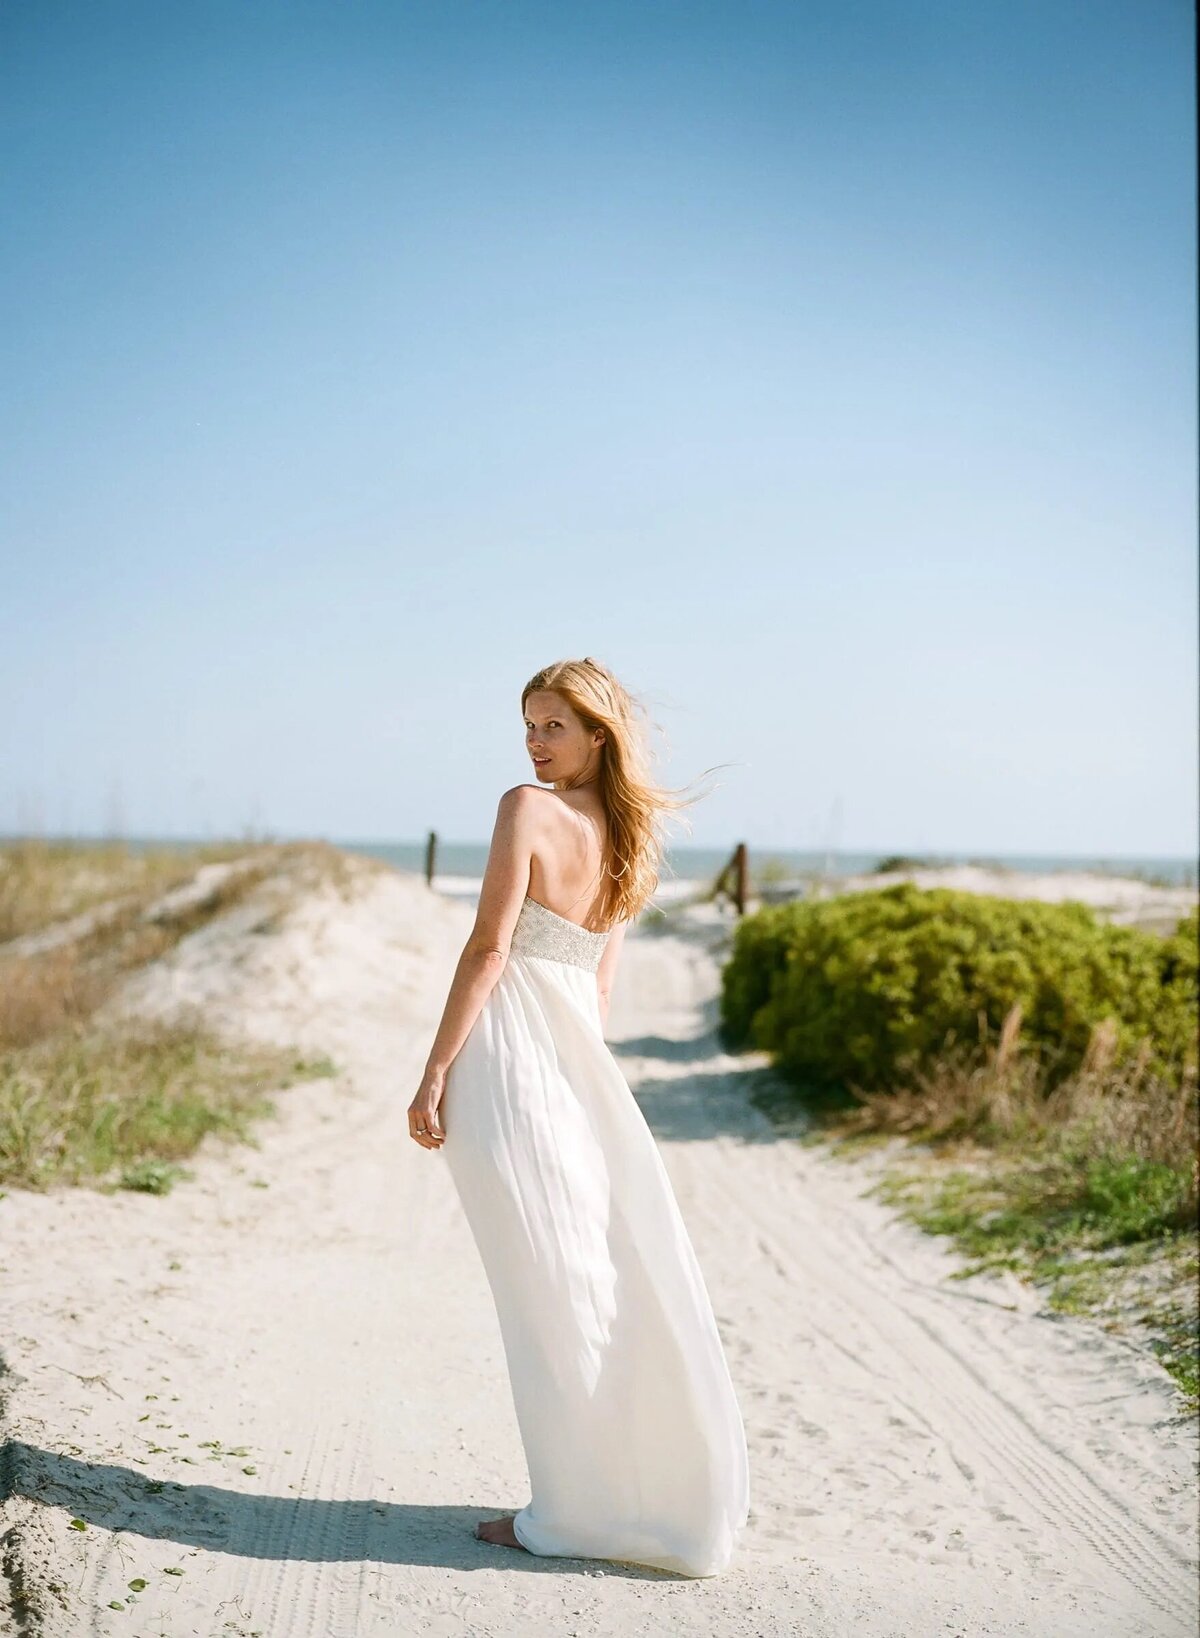 A bride in a flowing white gown looks back over her shoulder on a sandy beach path, with the sea in the distance, embodying a serene bridal moment.